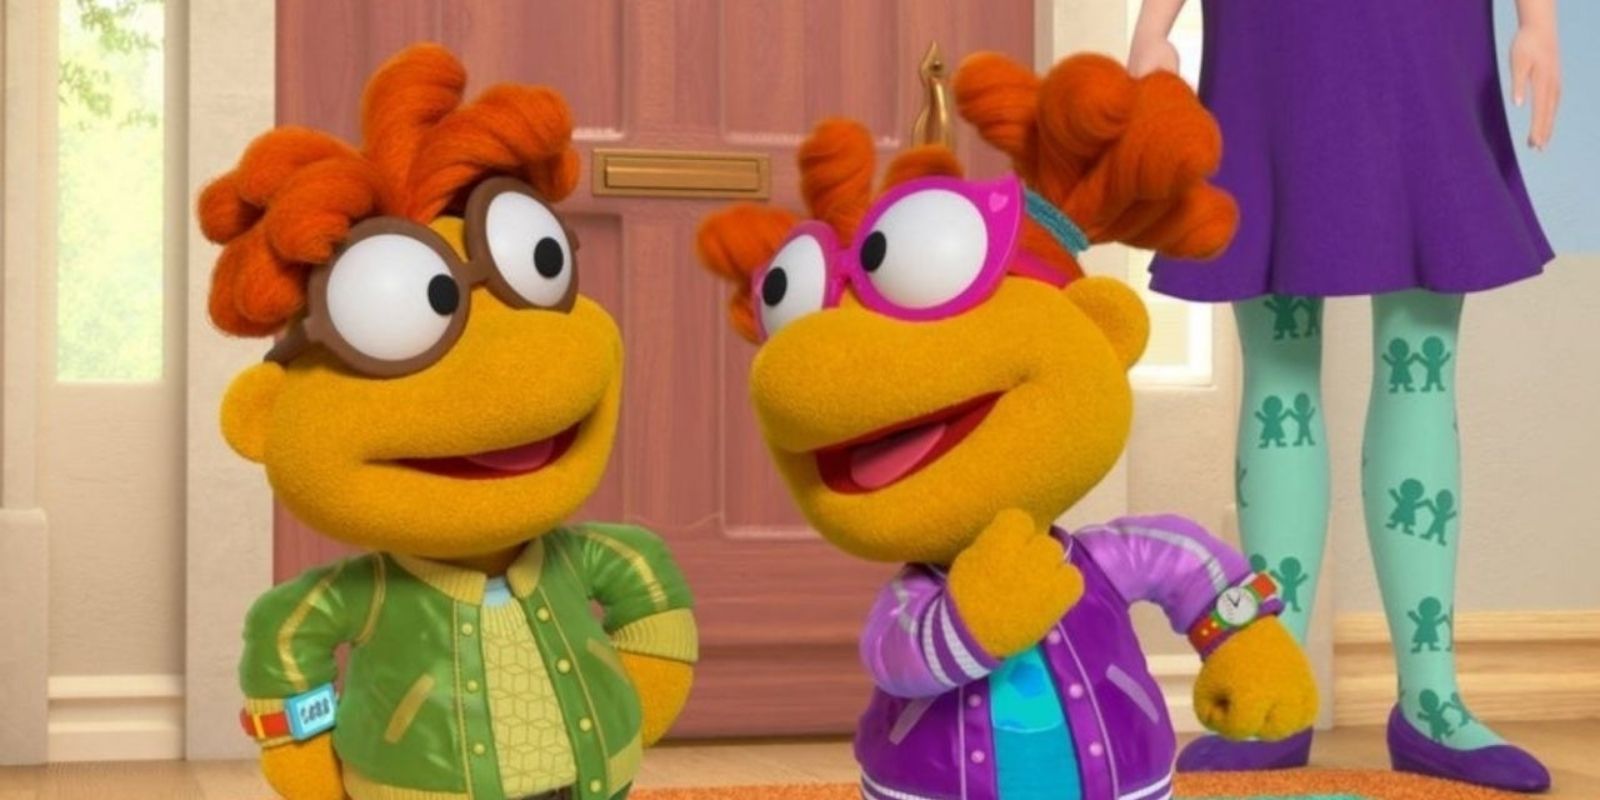 The Muppets The 6 Best (& 4 Worst) Relationships